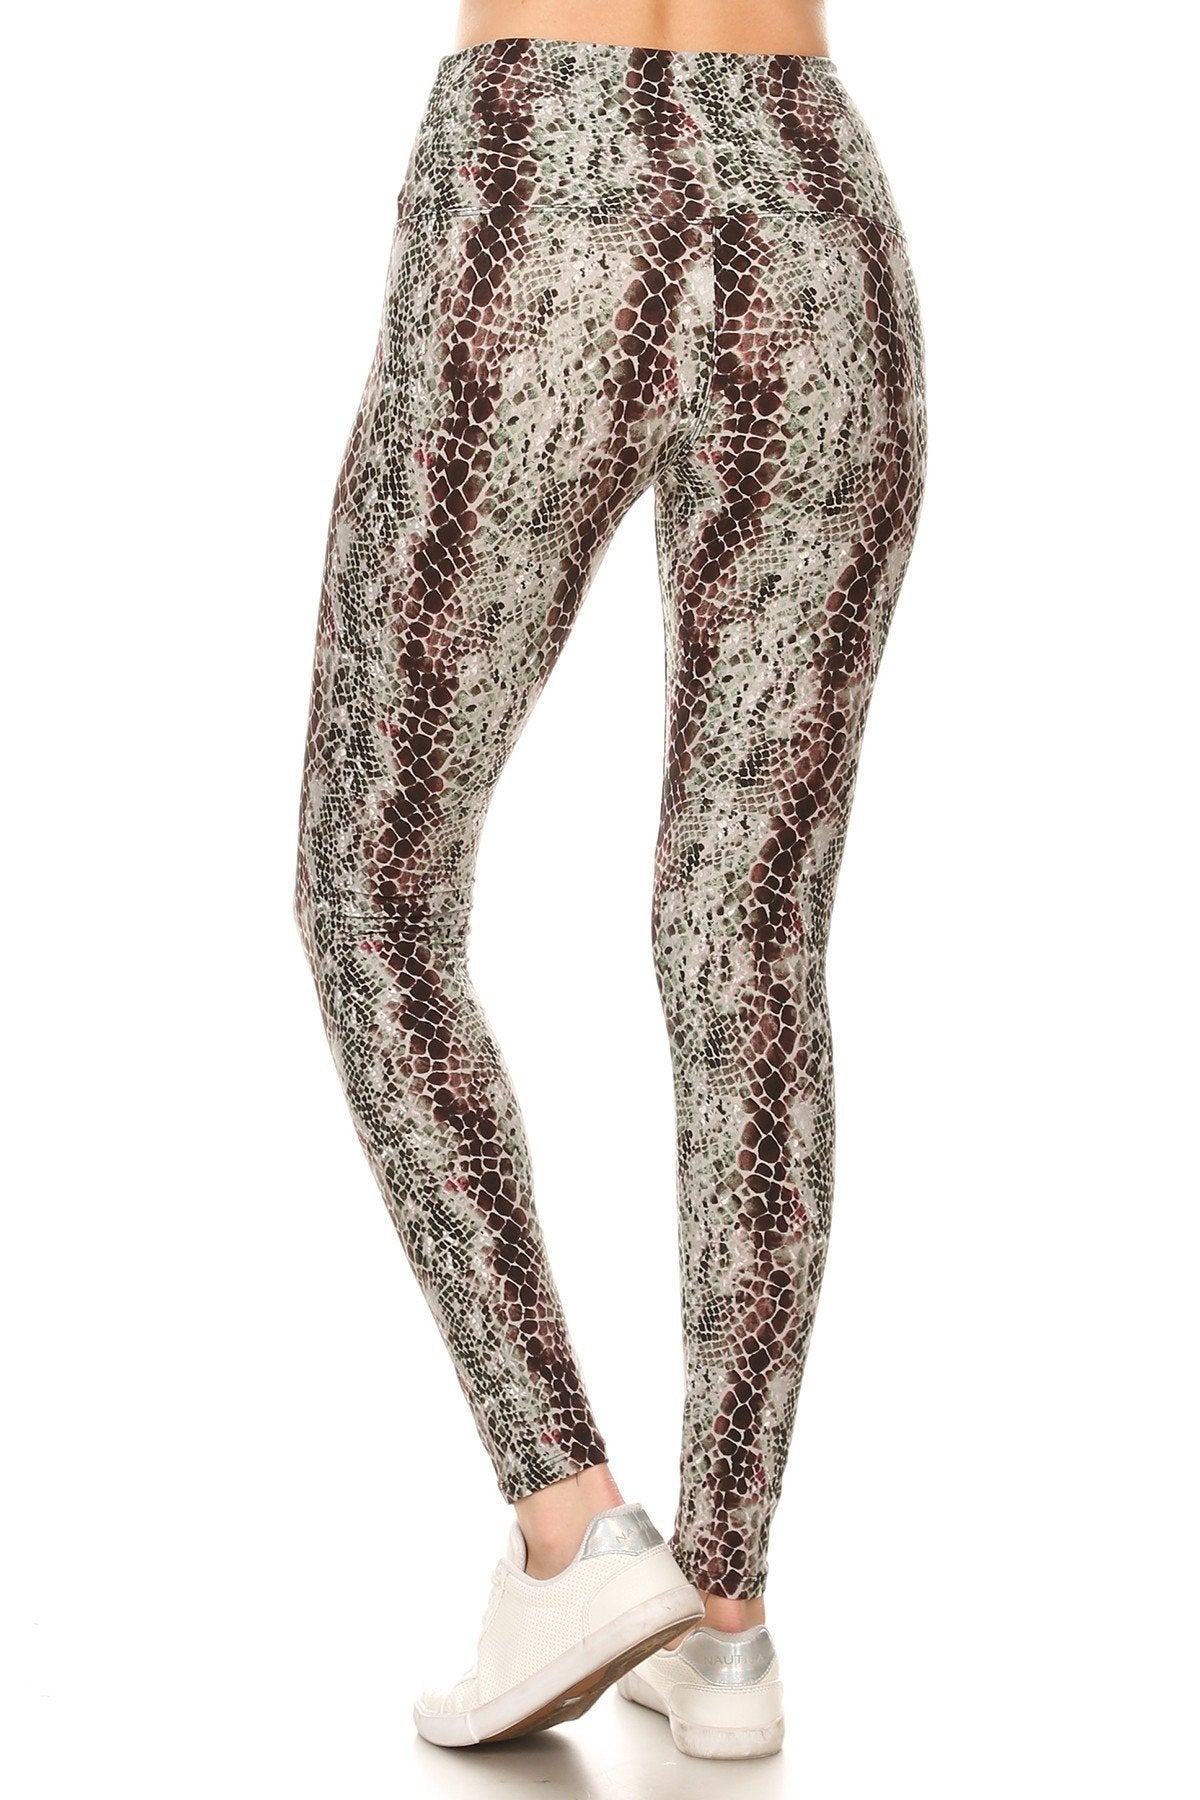 Yoga Style Banded Lined Snakeskin Printed Knit Legging With High Waist. - K I T S H O P 